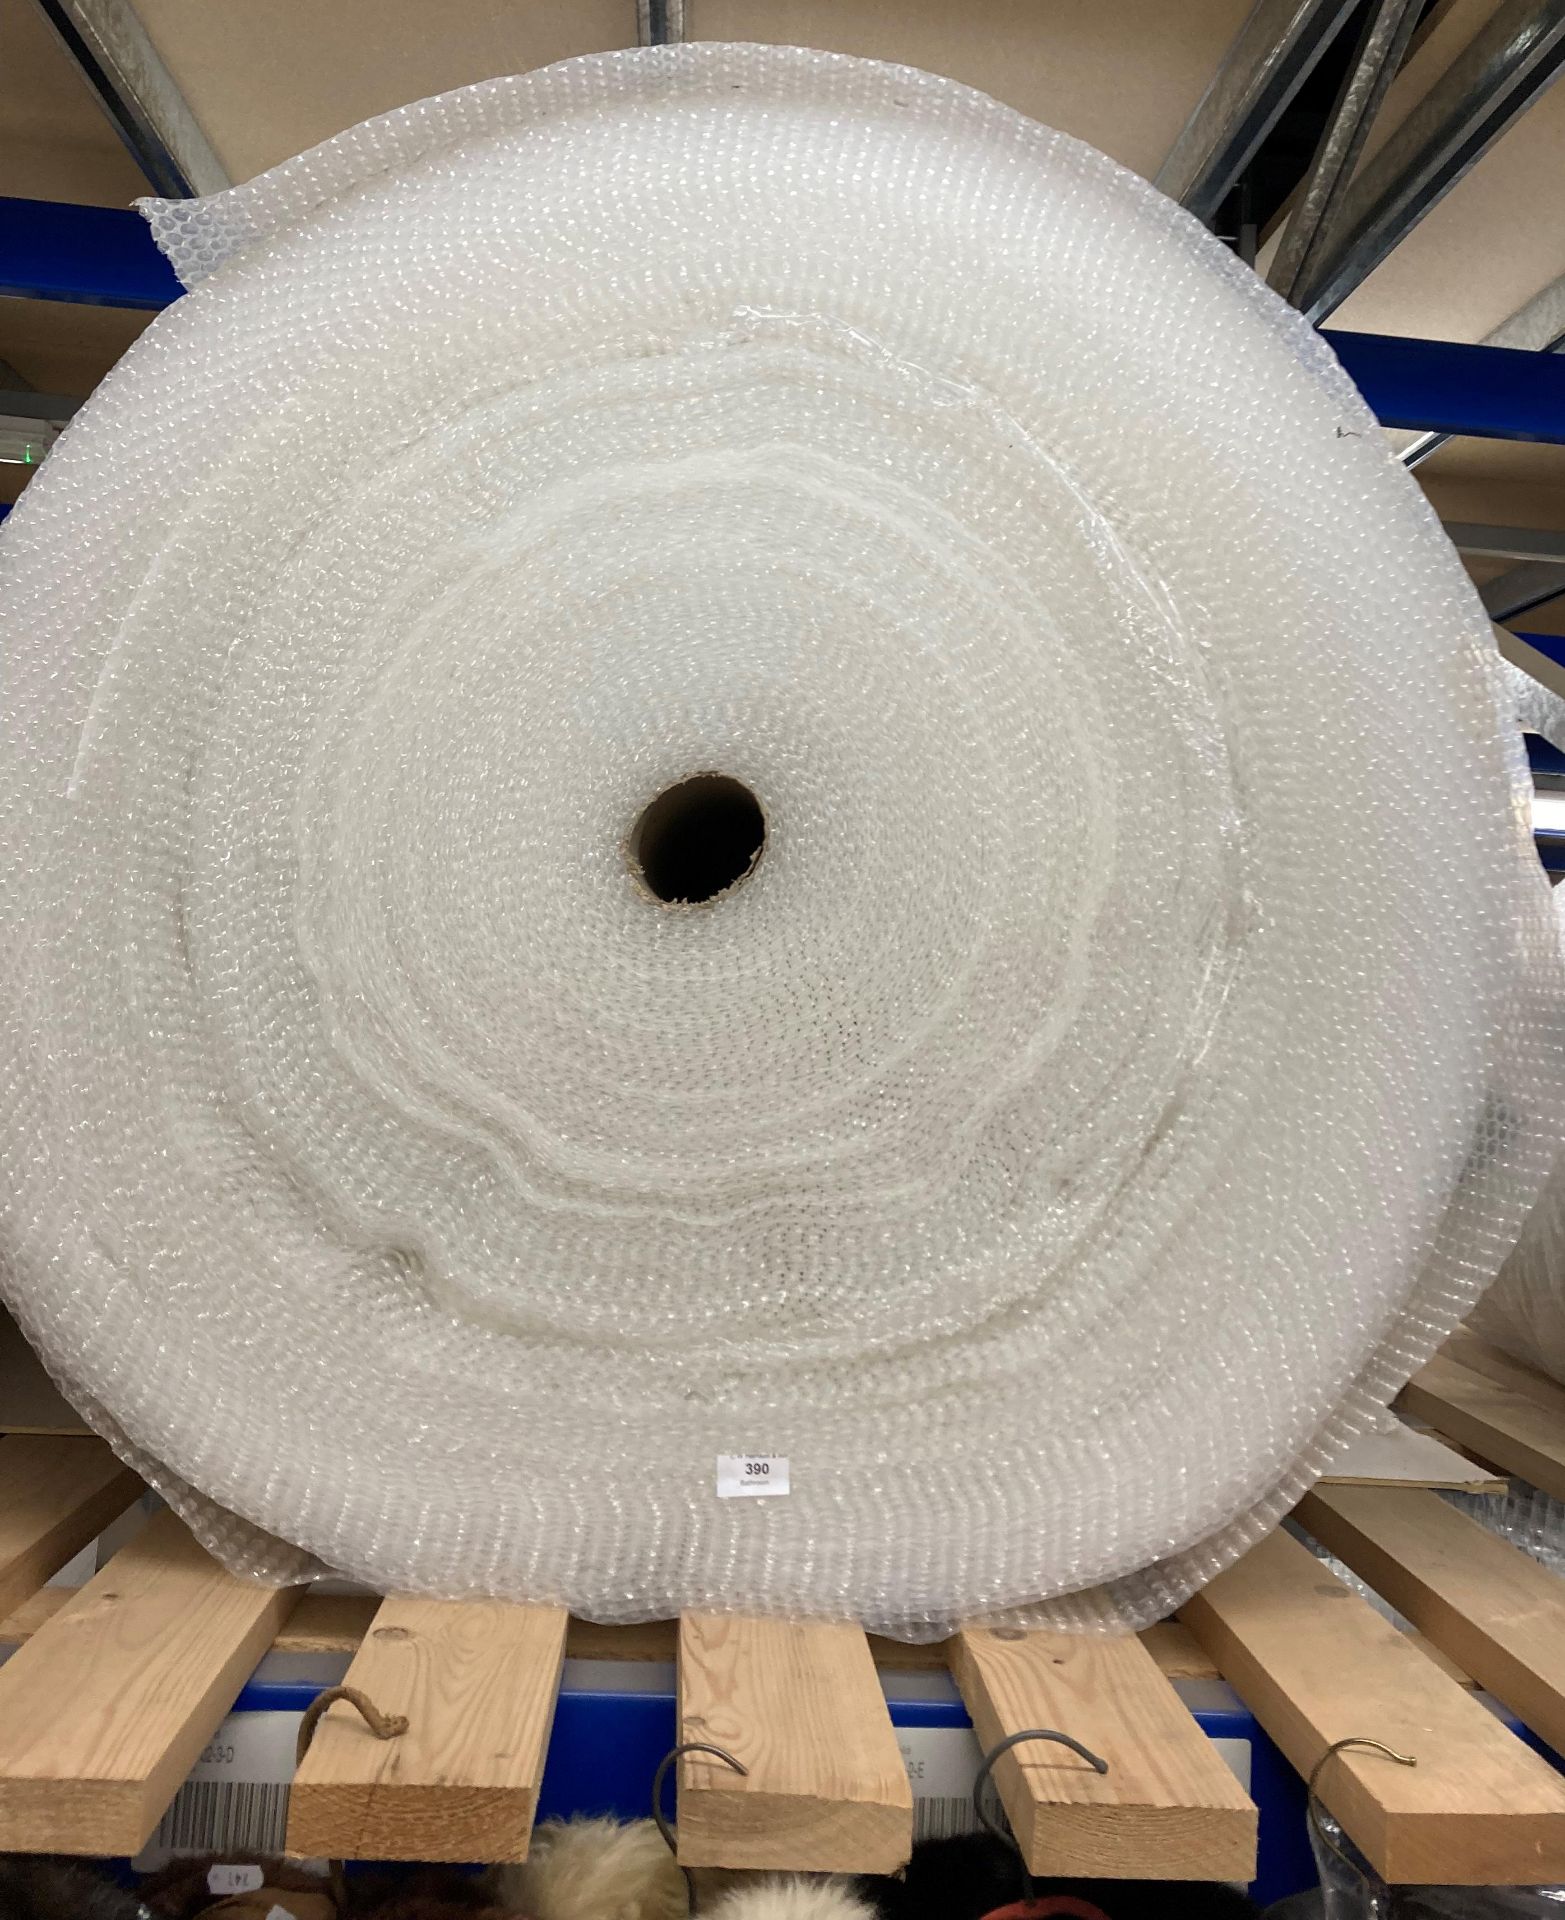 Large roll of bubble wrap (saleroom location: TOP T02)